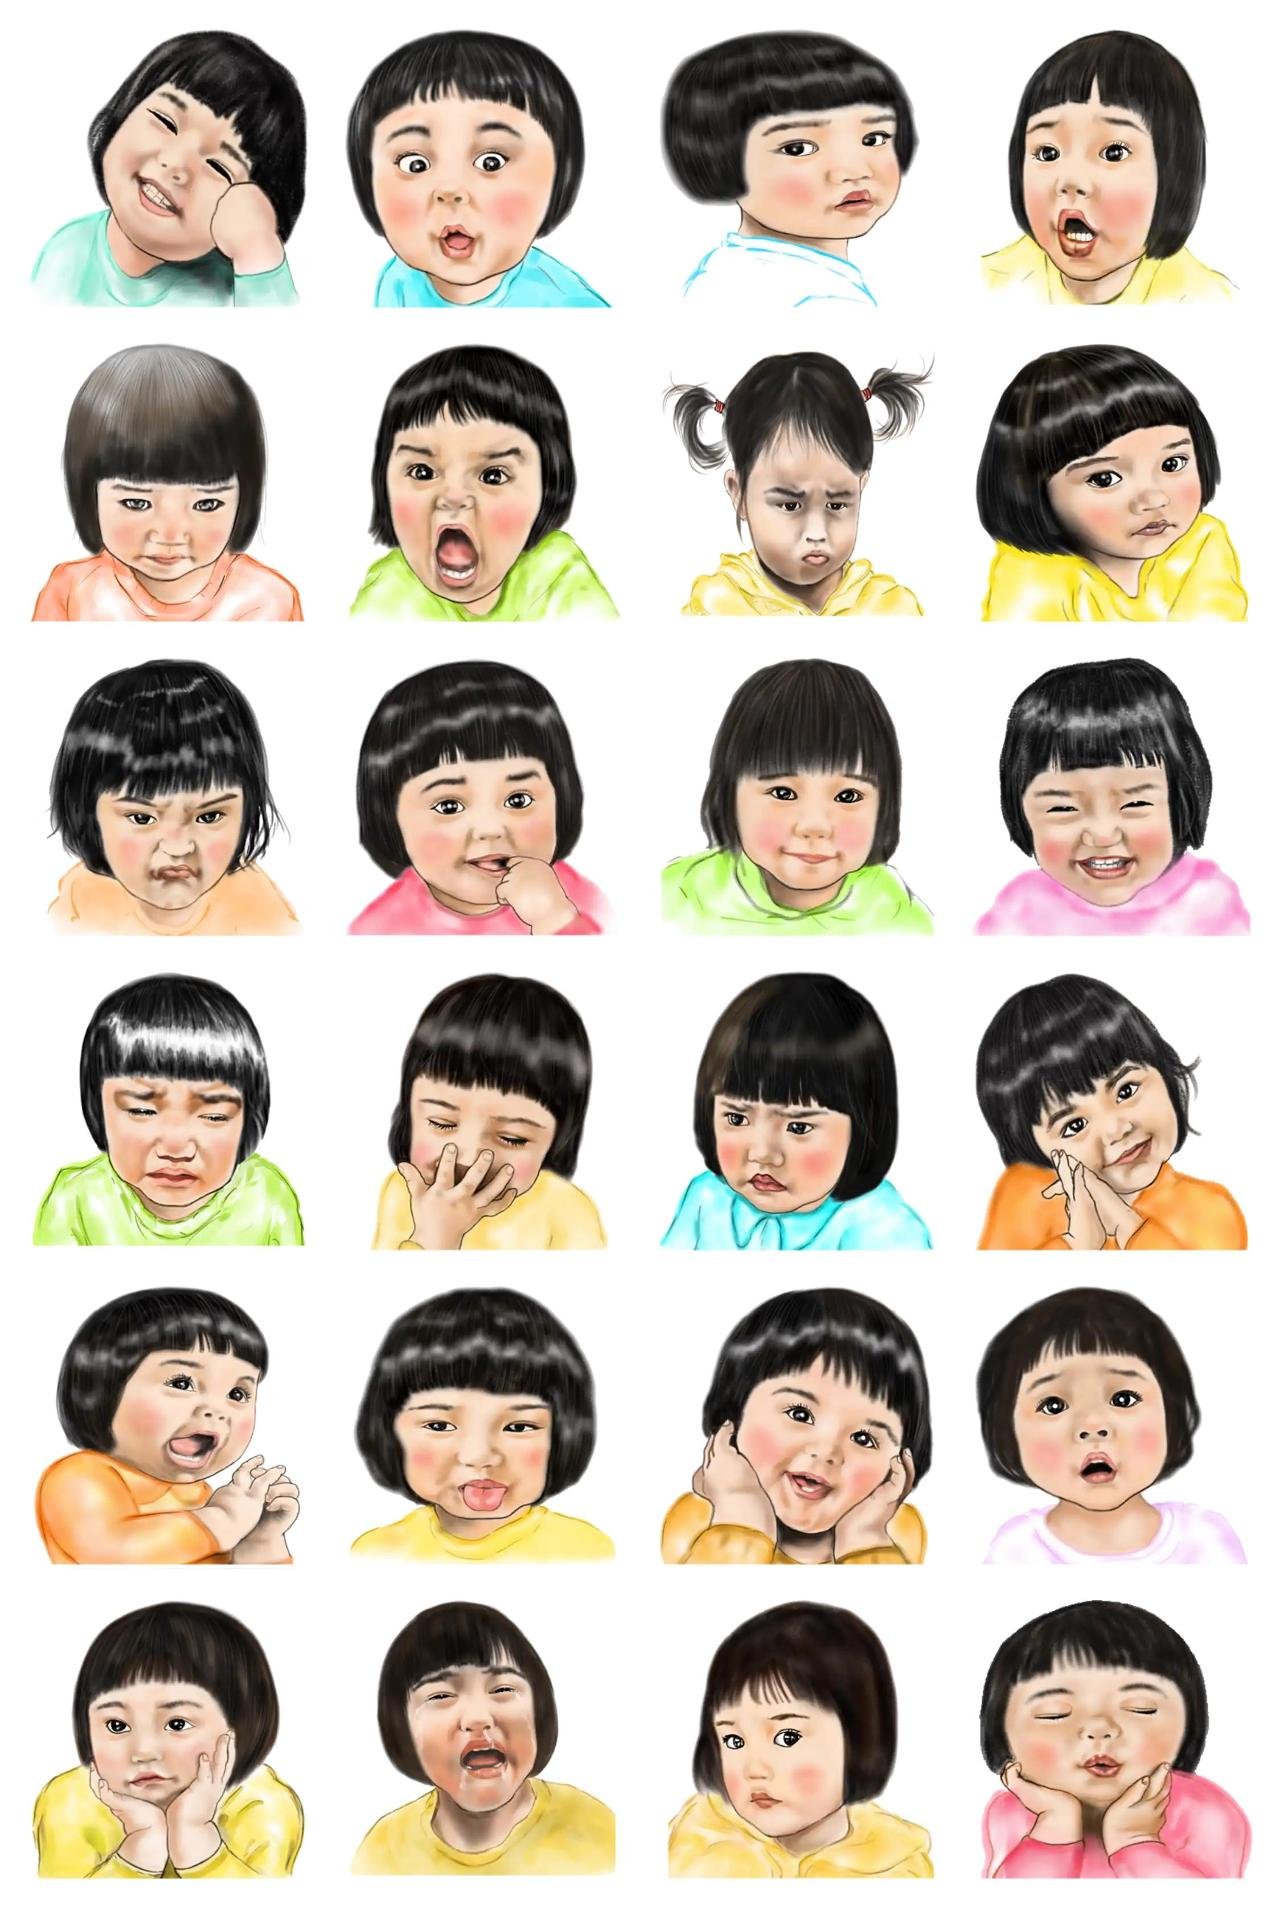 A smiling angel Subin People sticker pack for Whatsapp, Telegram, Signal, and others chatting and message apps